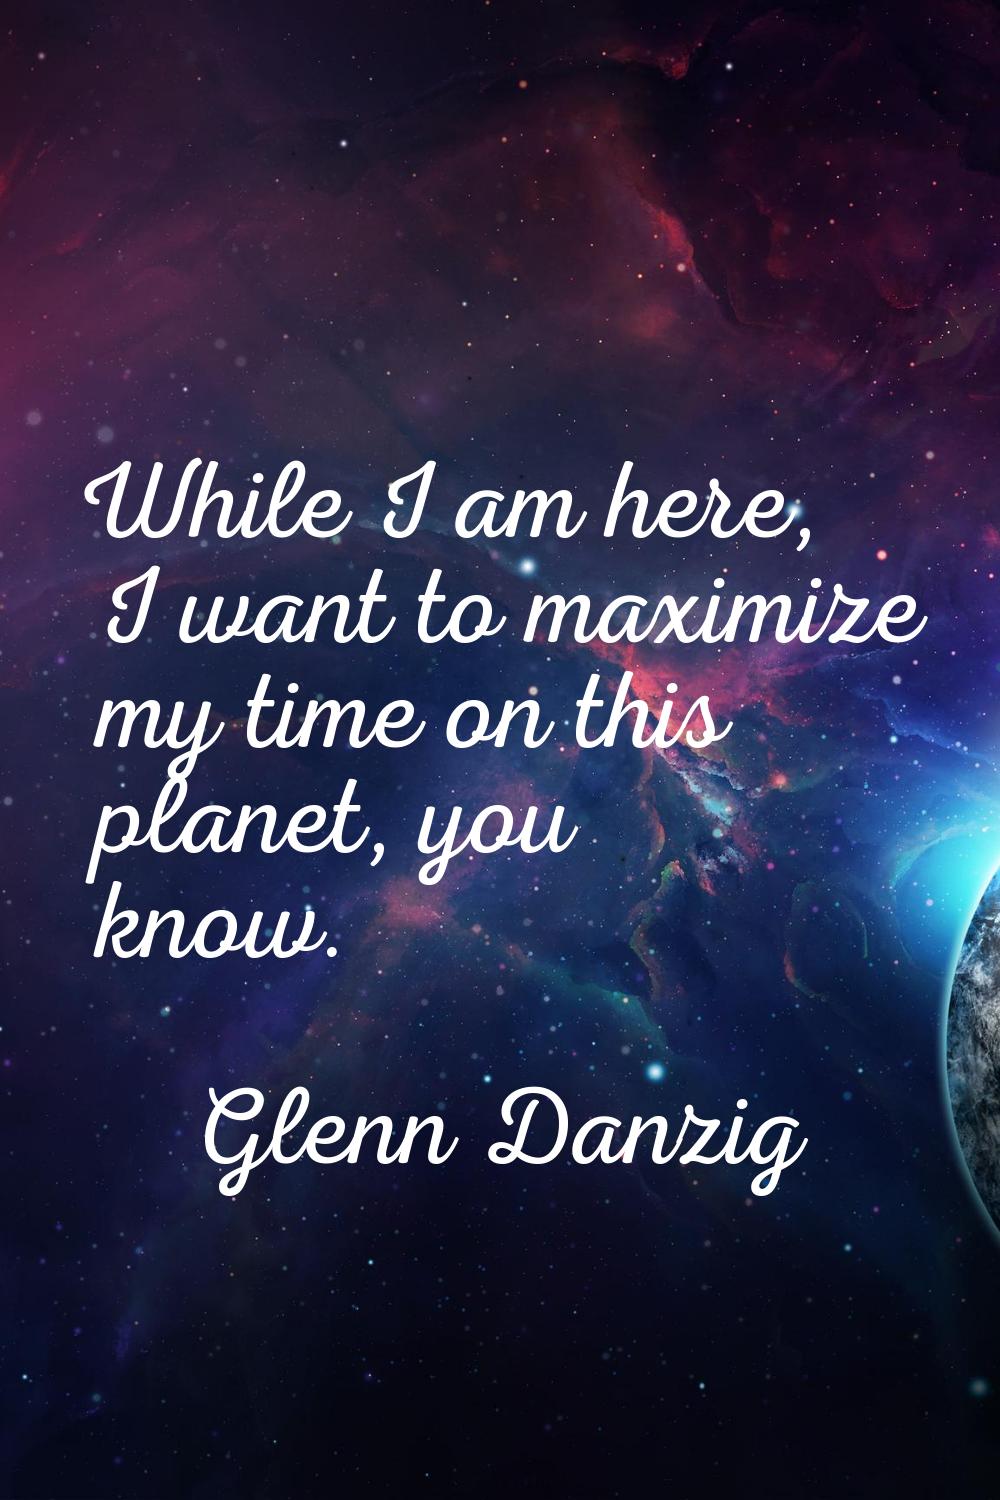 While I am here, I want to maximize my time on this planet, you know.